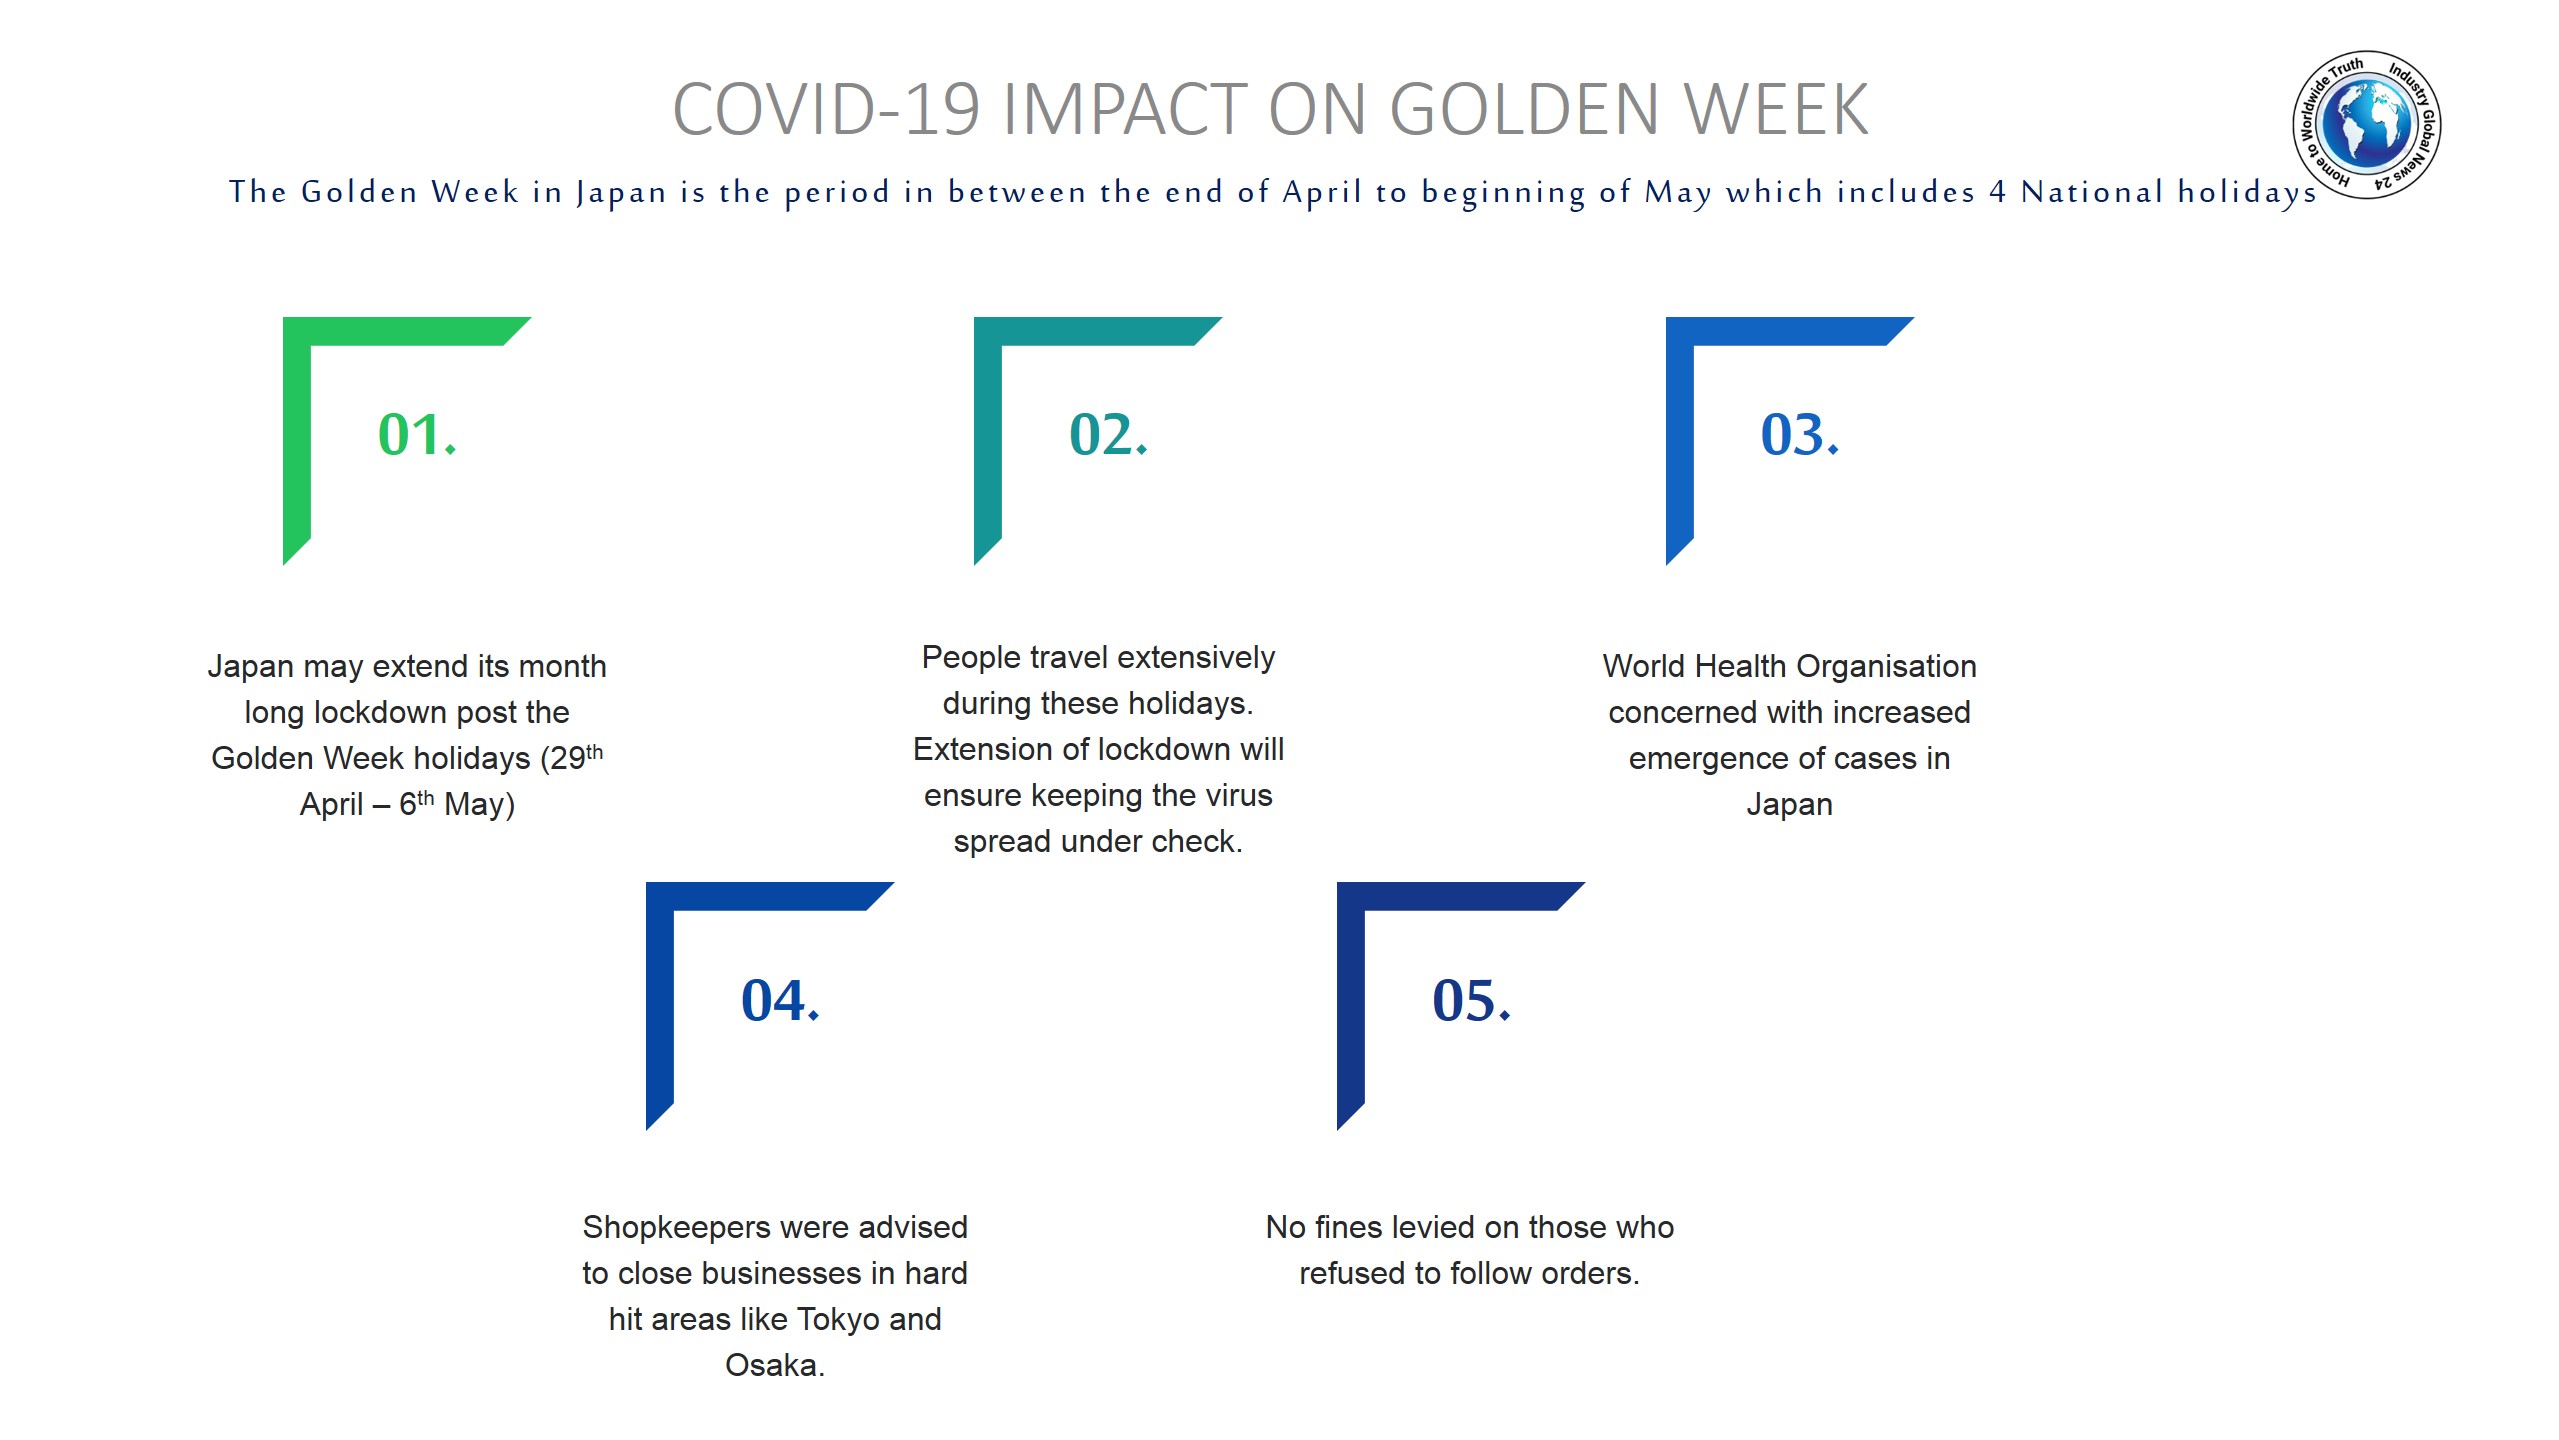 COVID-19 impact on Golden Week